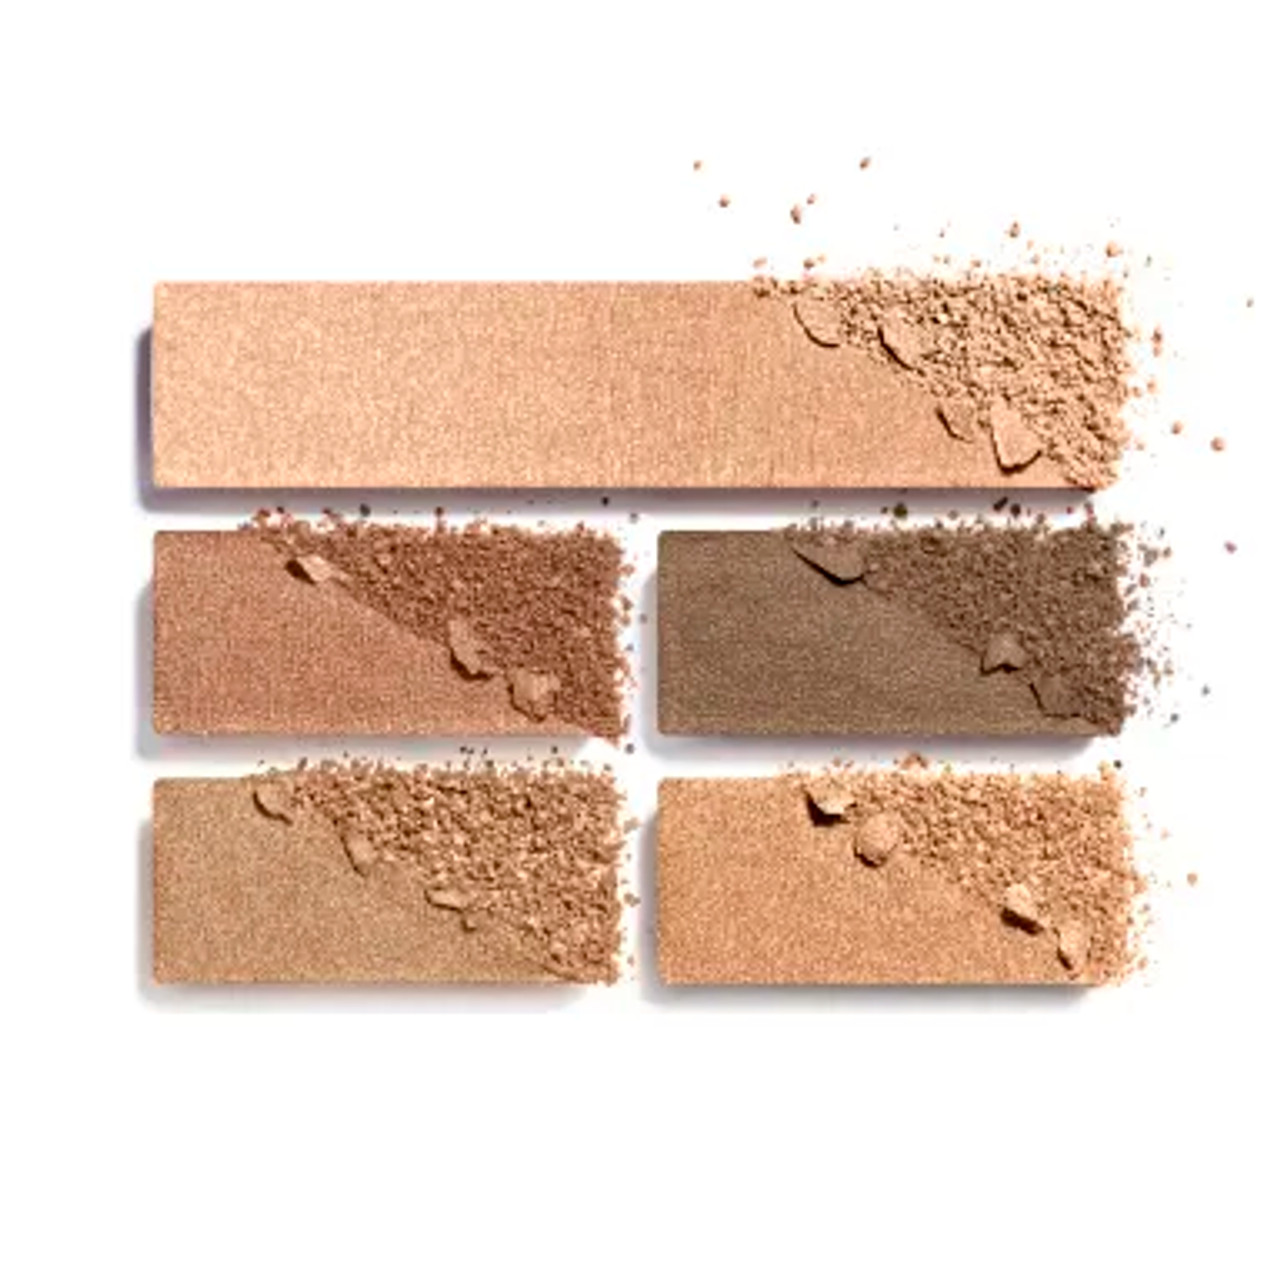 CHANEL Les Beiges Healthy Glow Natural Eyeshadow Palette ~ Intense 